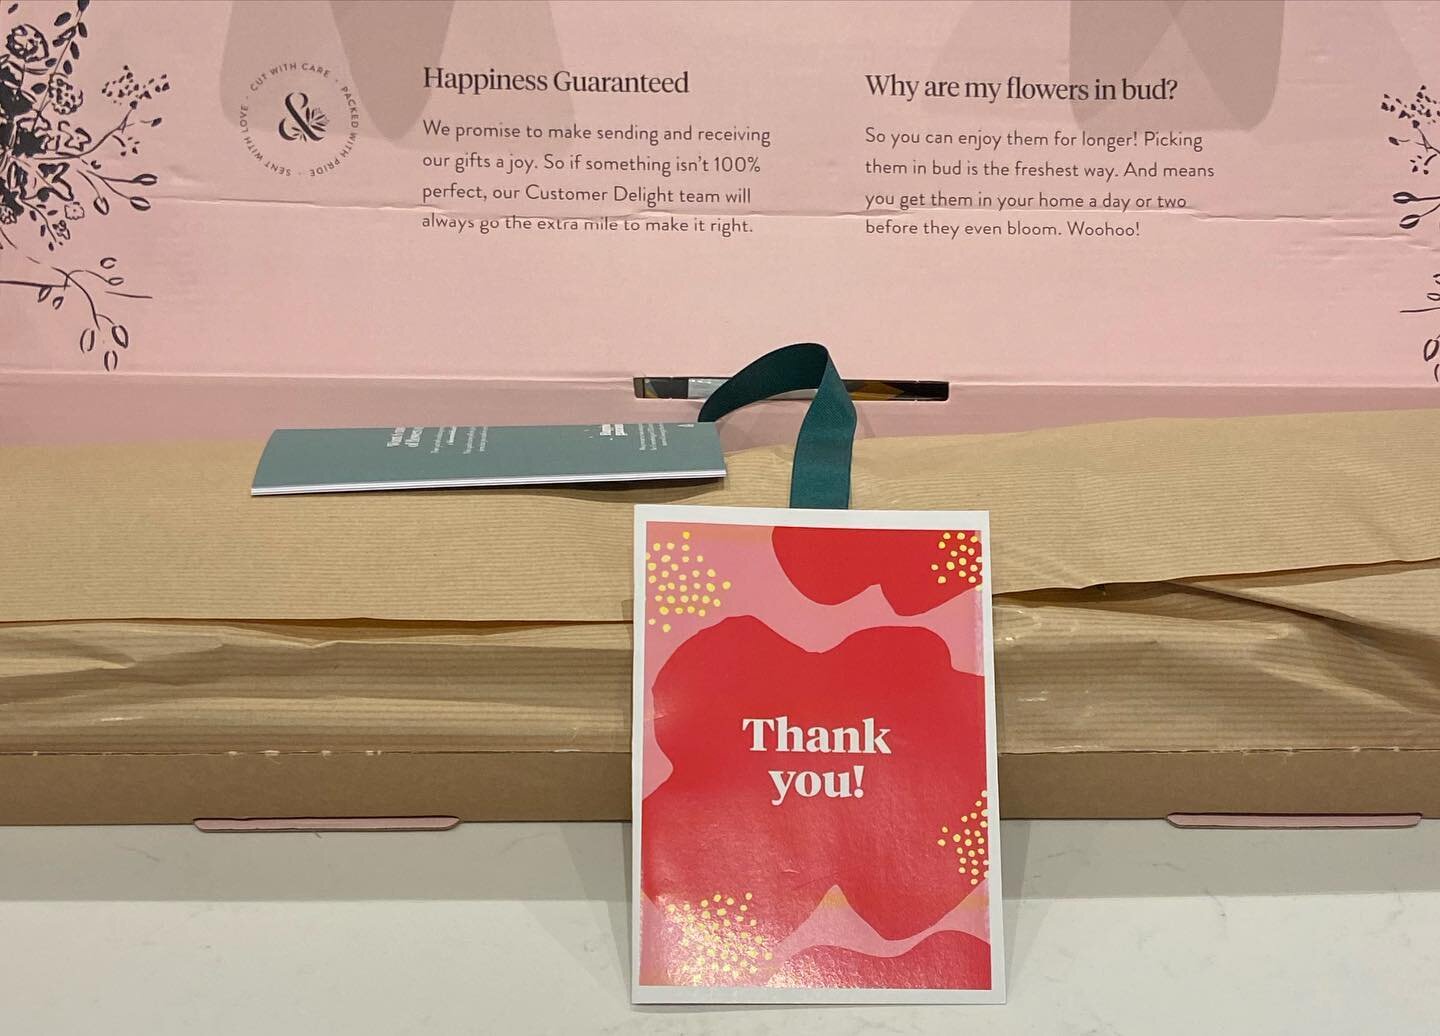 Thank you Sam from @wewearboost for sending this very sweet surprise. It makes me so happy to know that everyone enjoyed the fitting experience we created together at your last event! #LoveMyJob